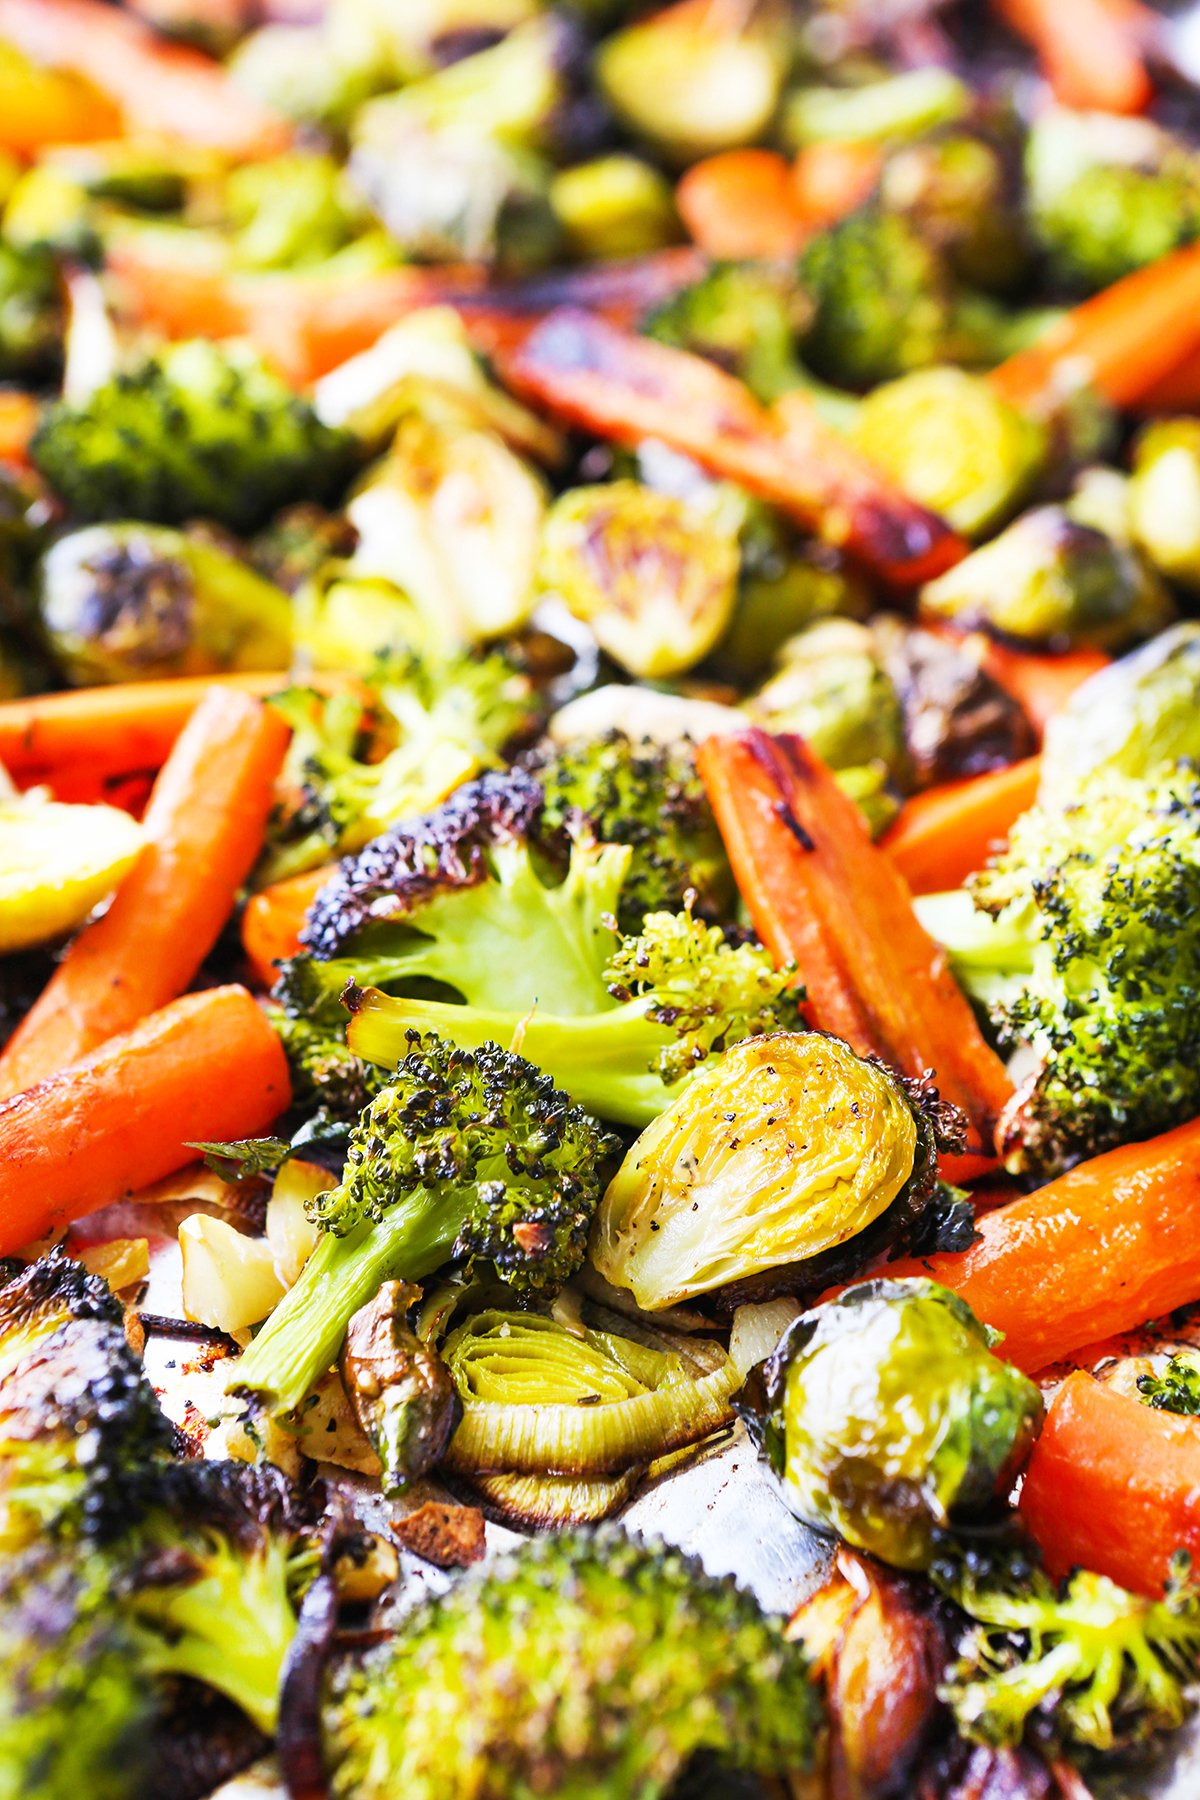 Close up of roasted veggies - brussels sprouts and broccoli and carrots.